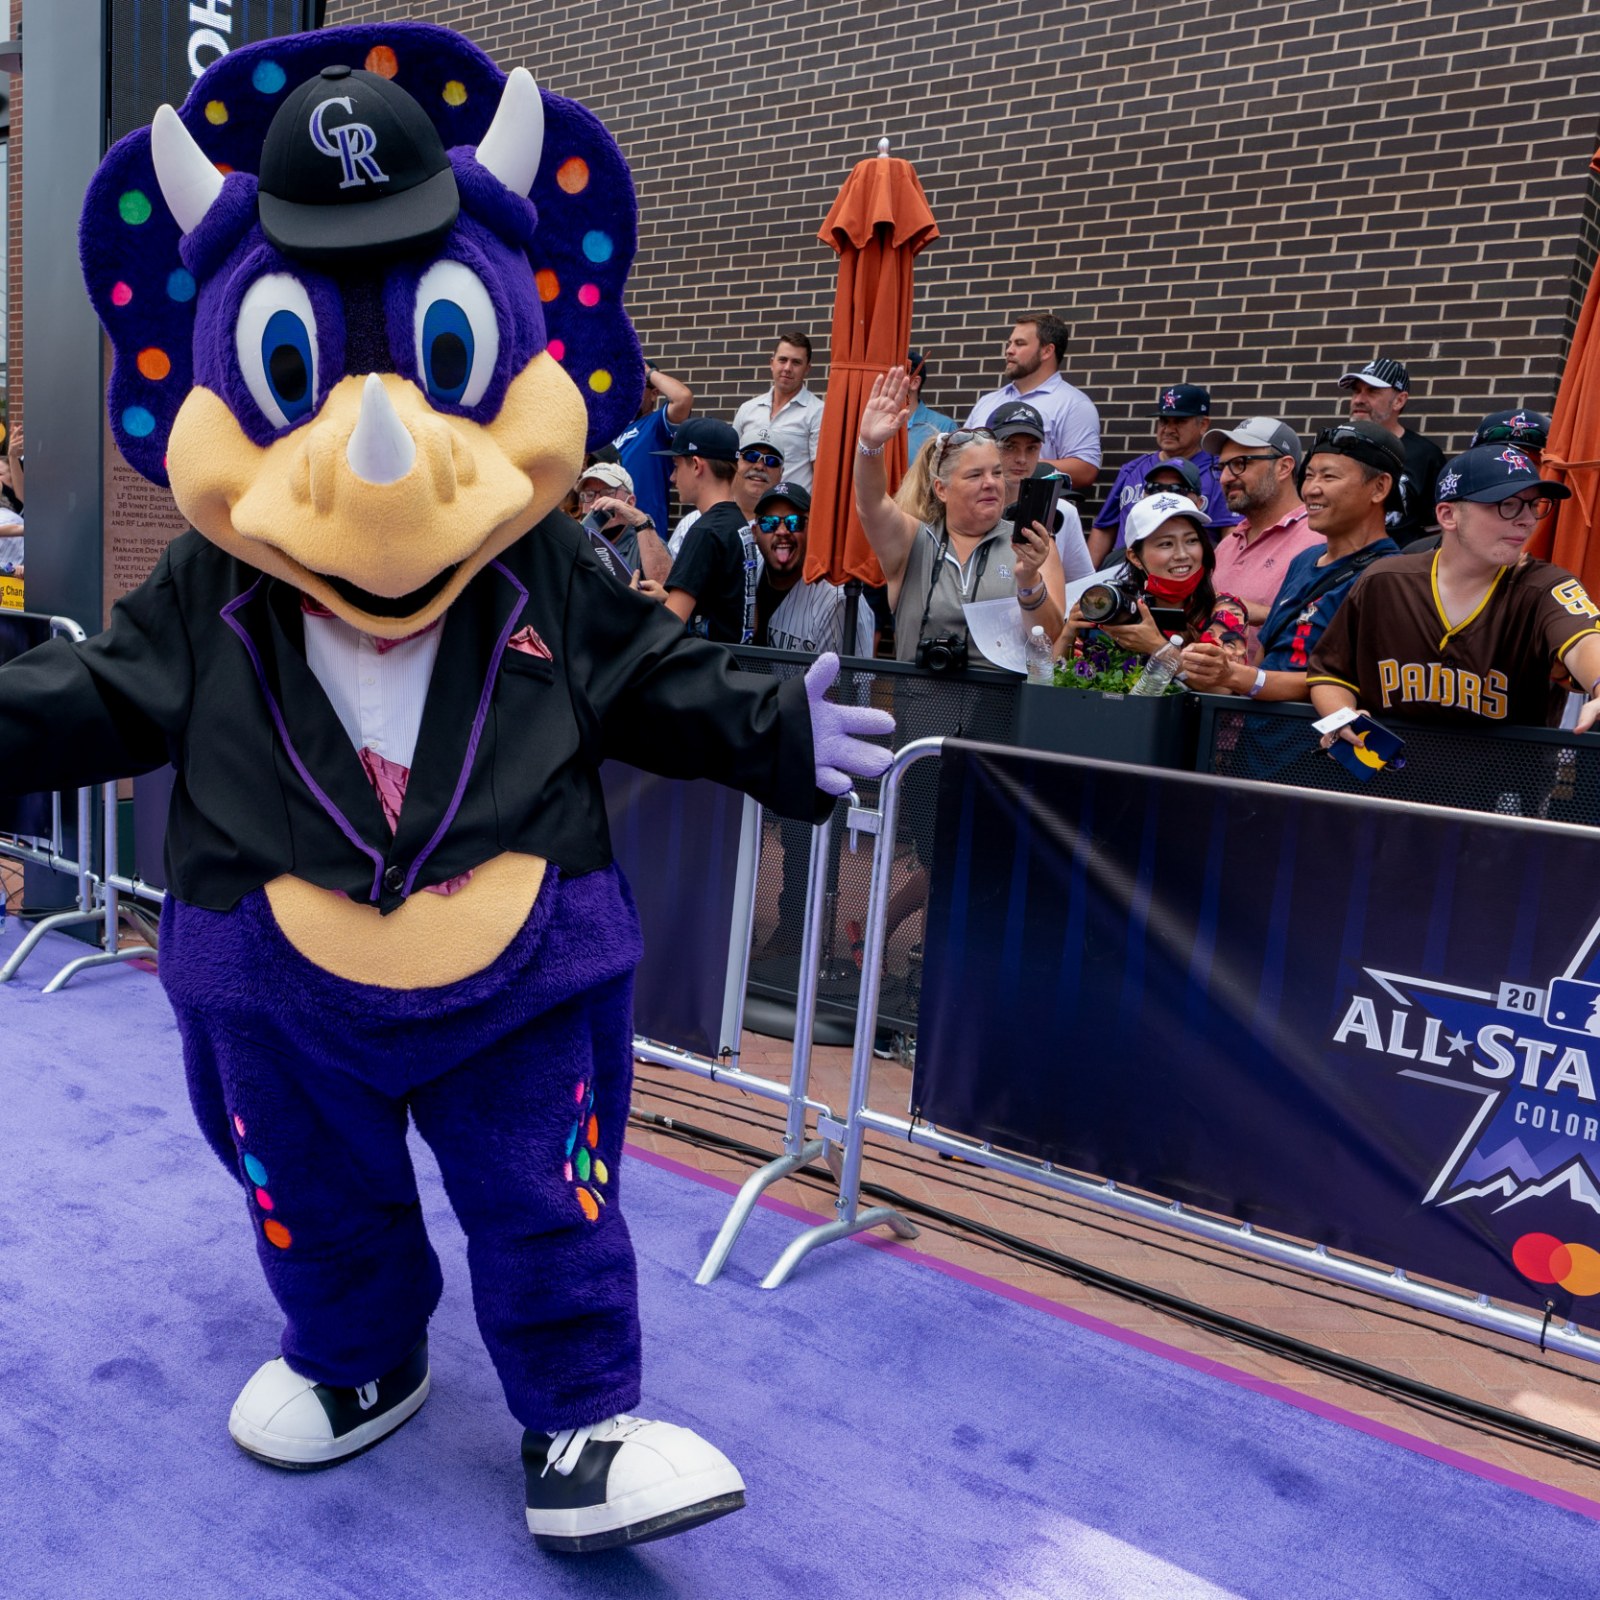 Dinger, The Much-Maligned Mascot, Just Wants Colorado's Love — And